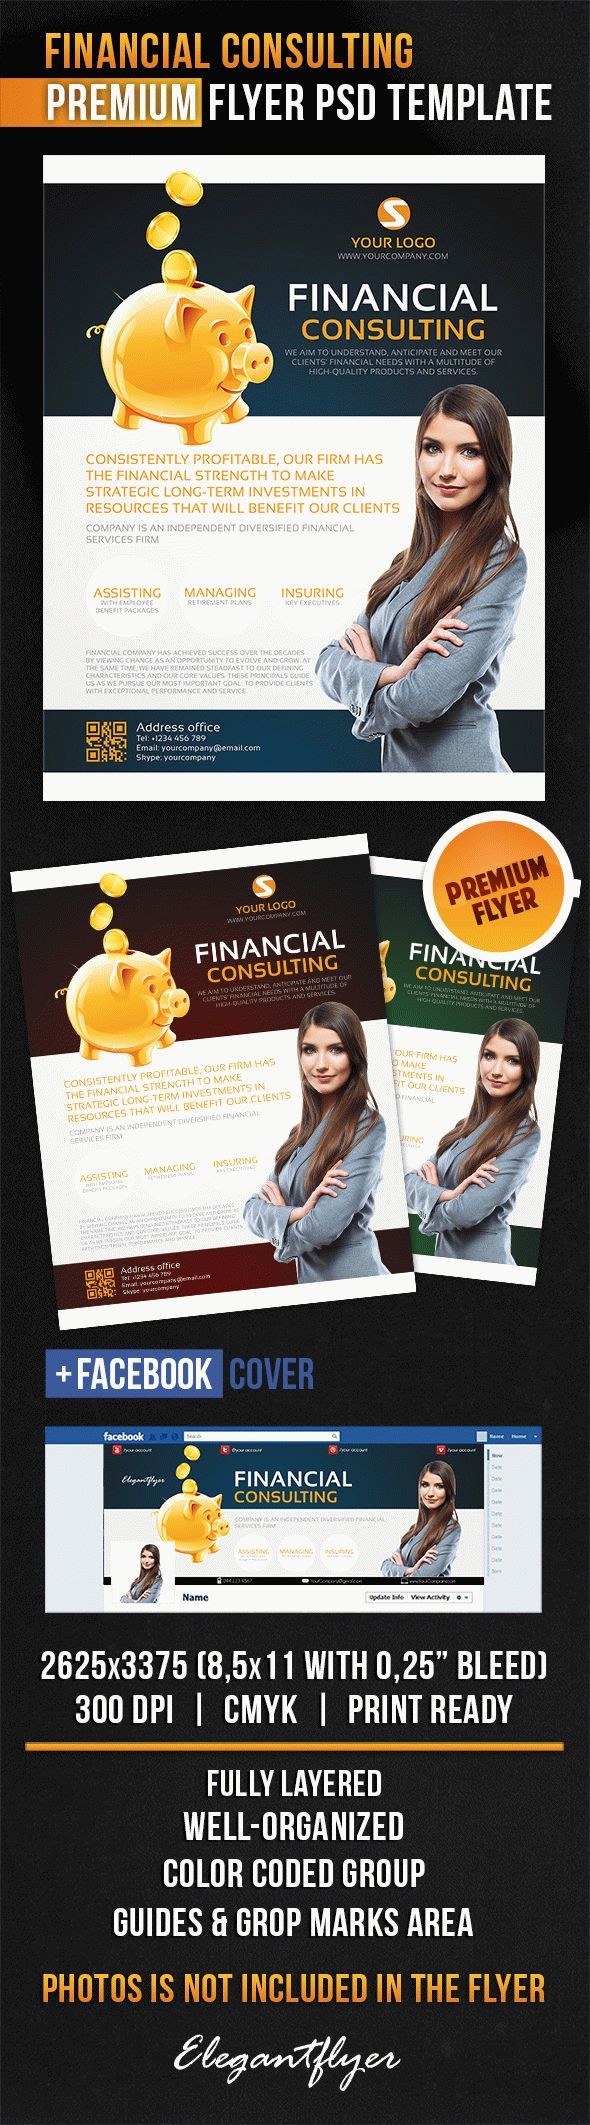 Financial Consulting by ElegantFlyer